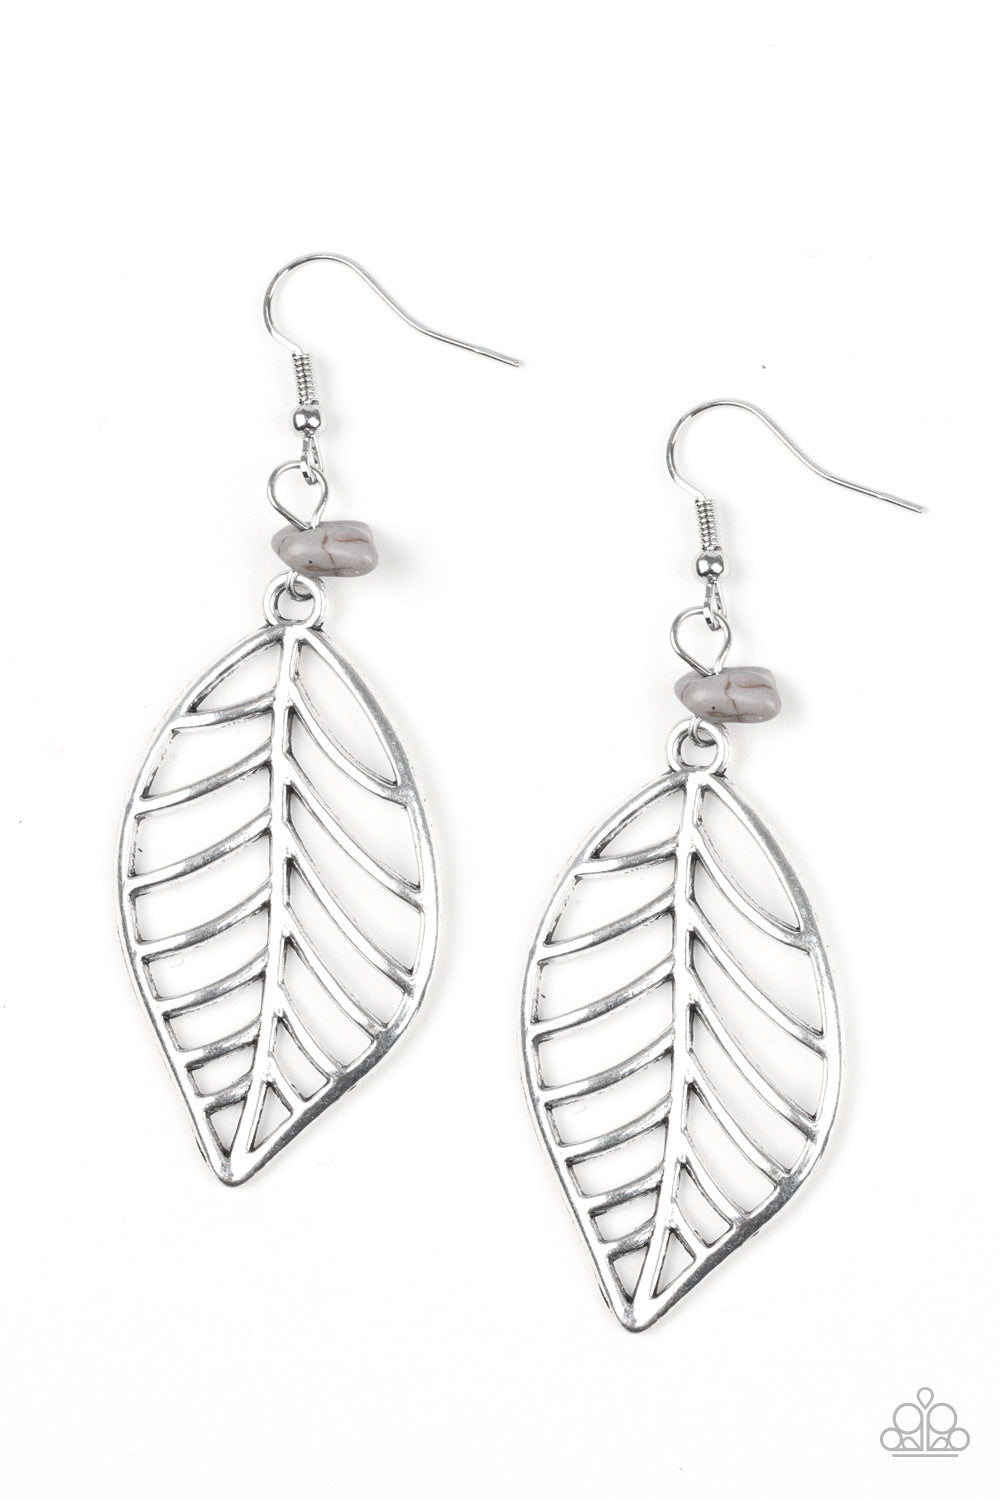 BOUGH OUT - SILVER EARRING